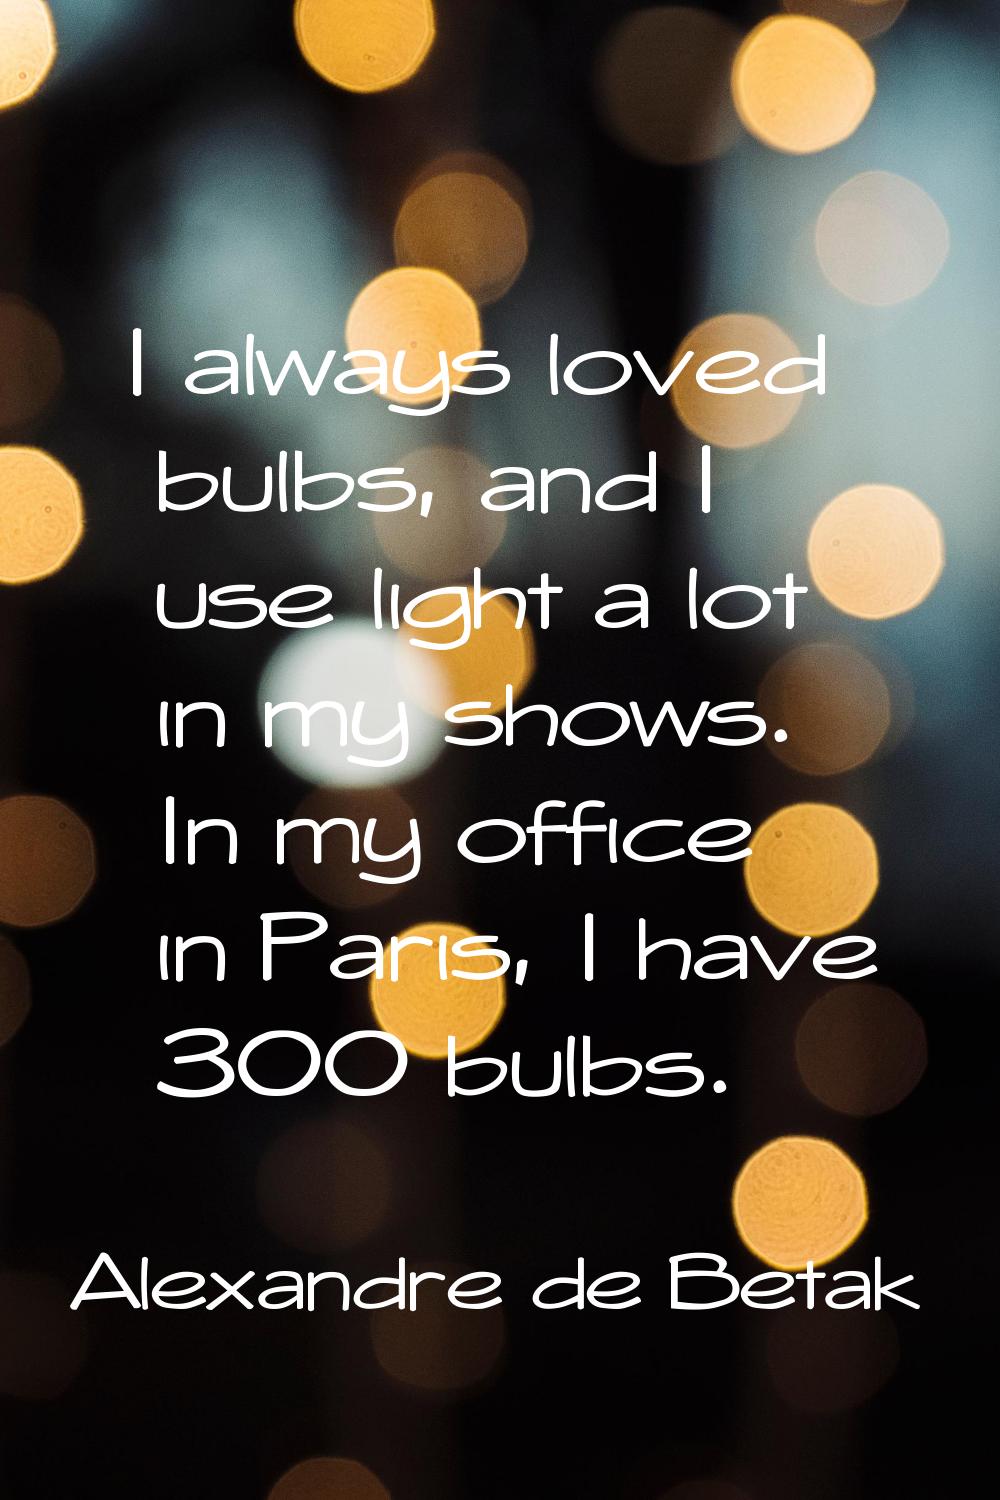 I always loved bulbs, and I use light a lot in my shows. In my office in Paris, I have 300 bulbs.